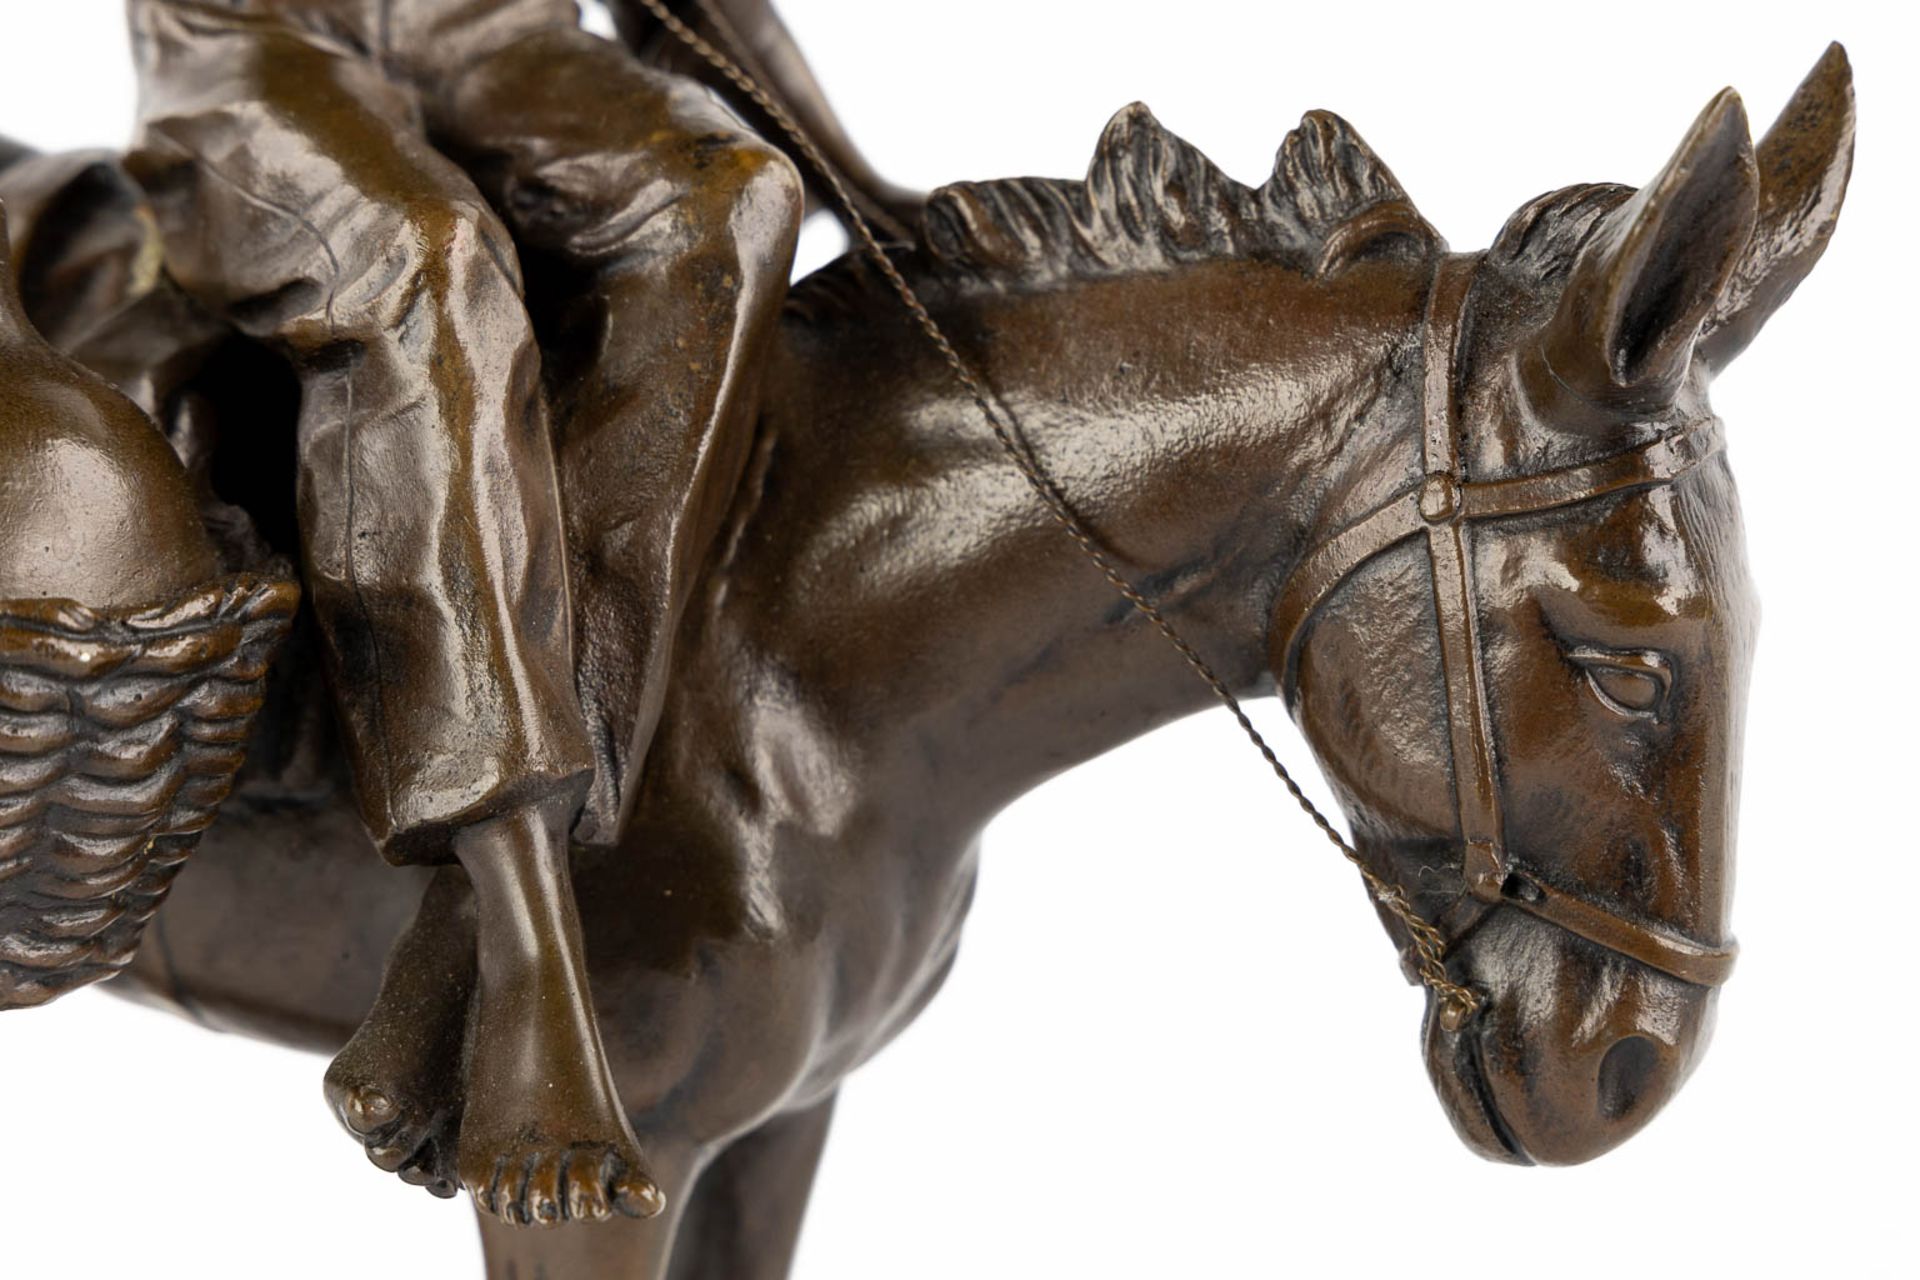 A small figurine of a young man riding a donkey, patinated bronze. Circa 1900. (L:18 x W:28 x H:33 c - Image 9 of 10